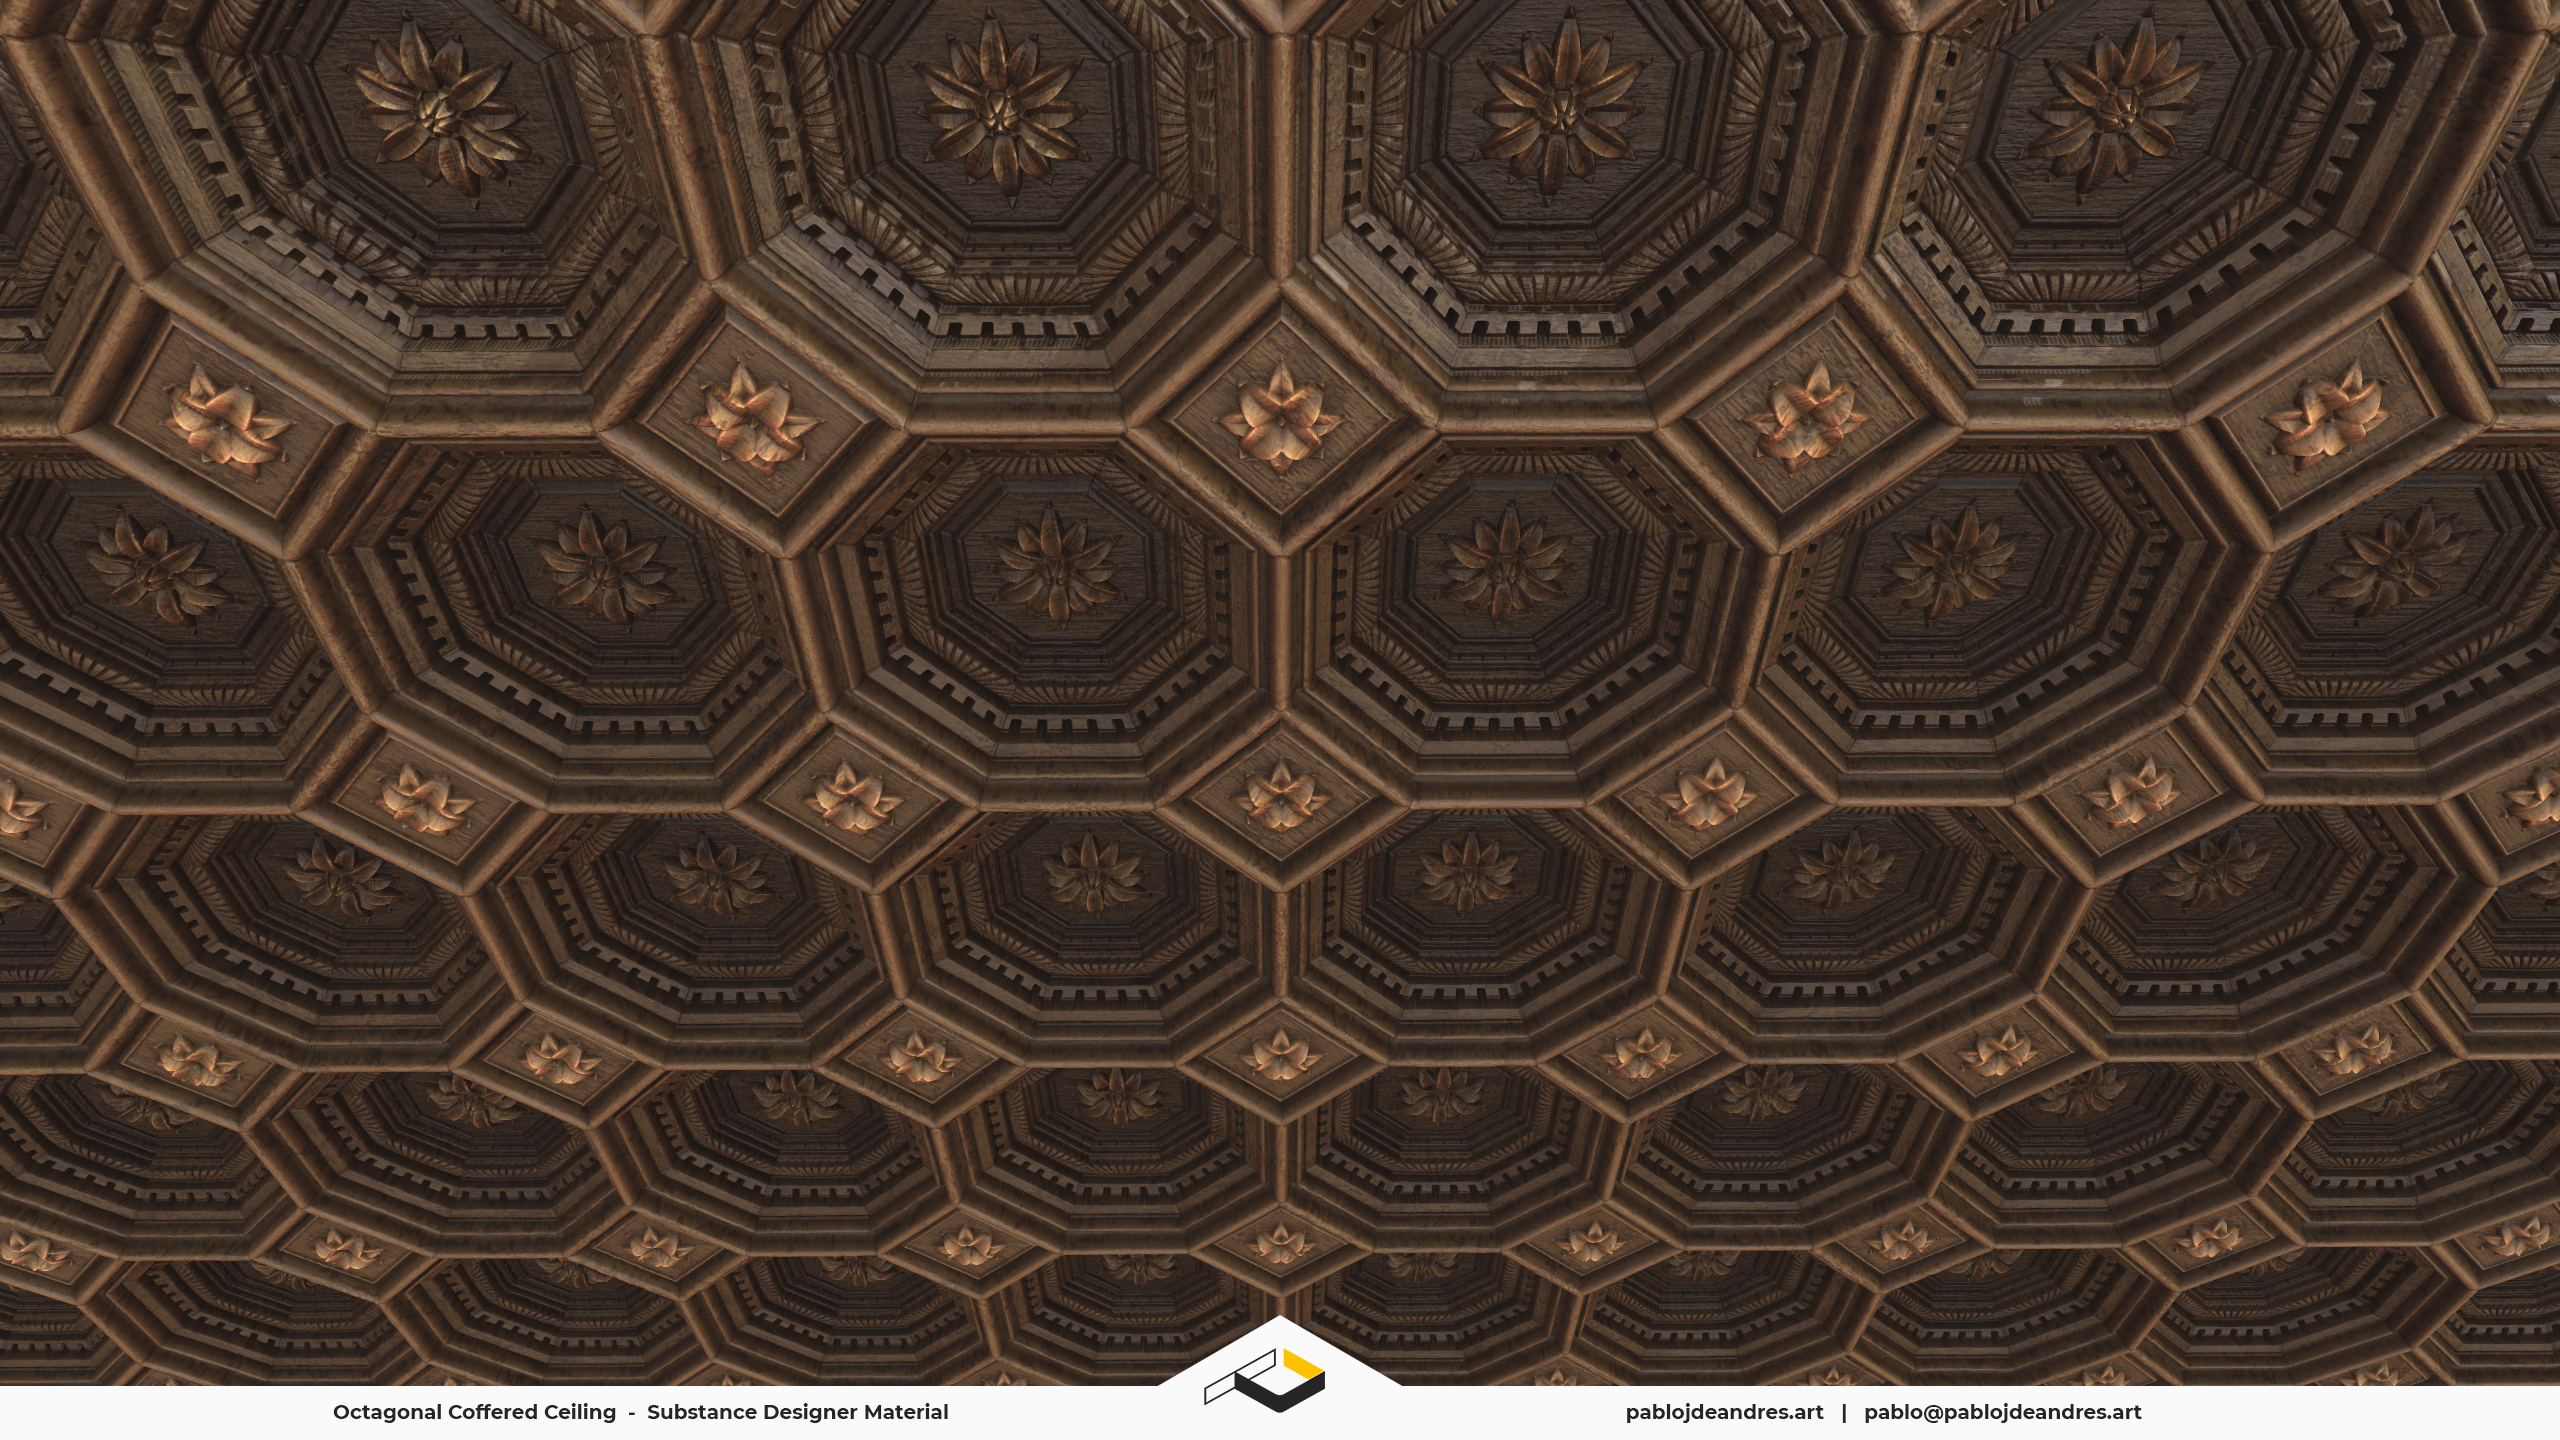 Different Types Of Coffered Ceilings